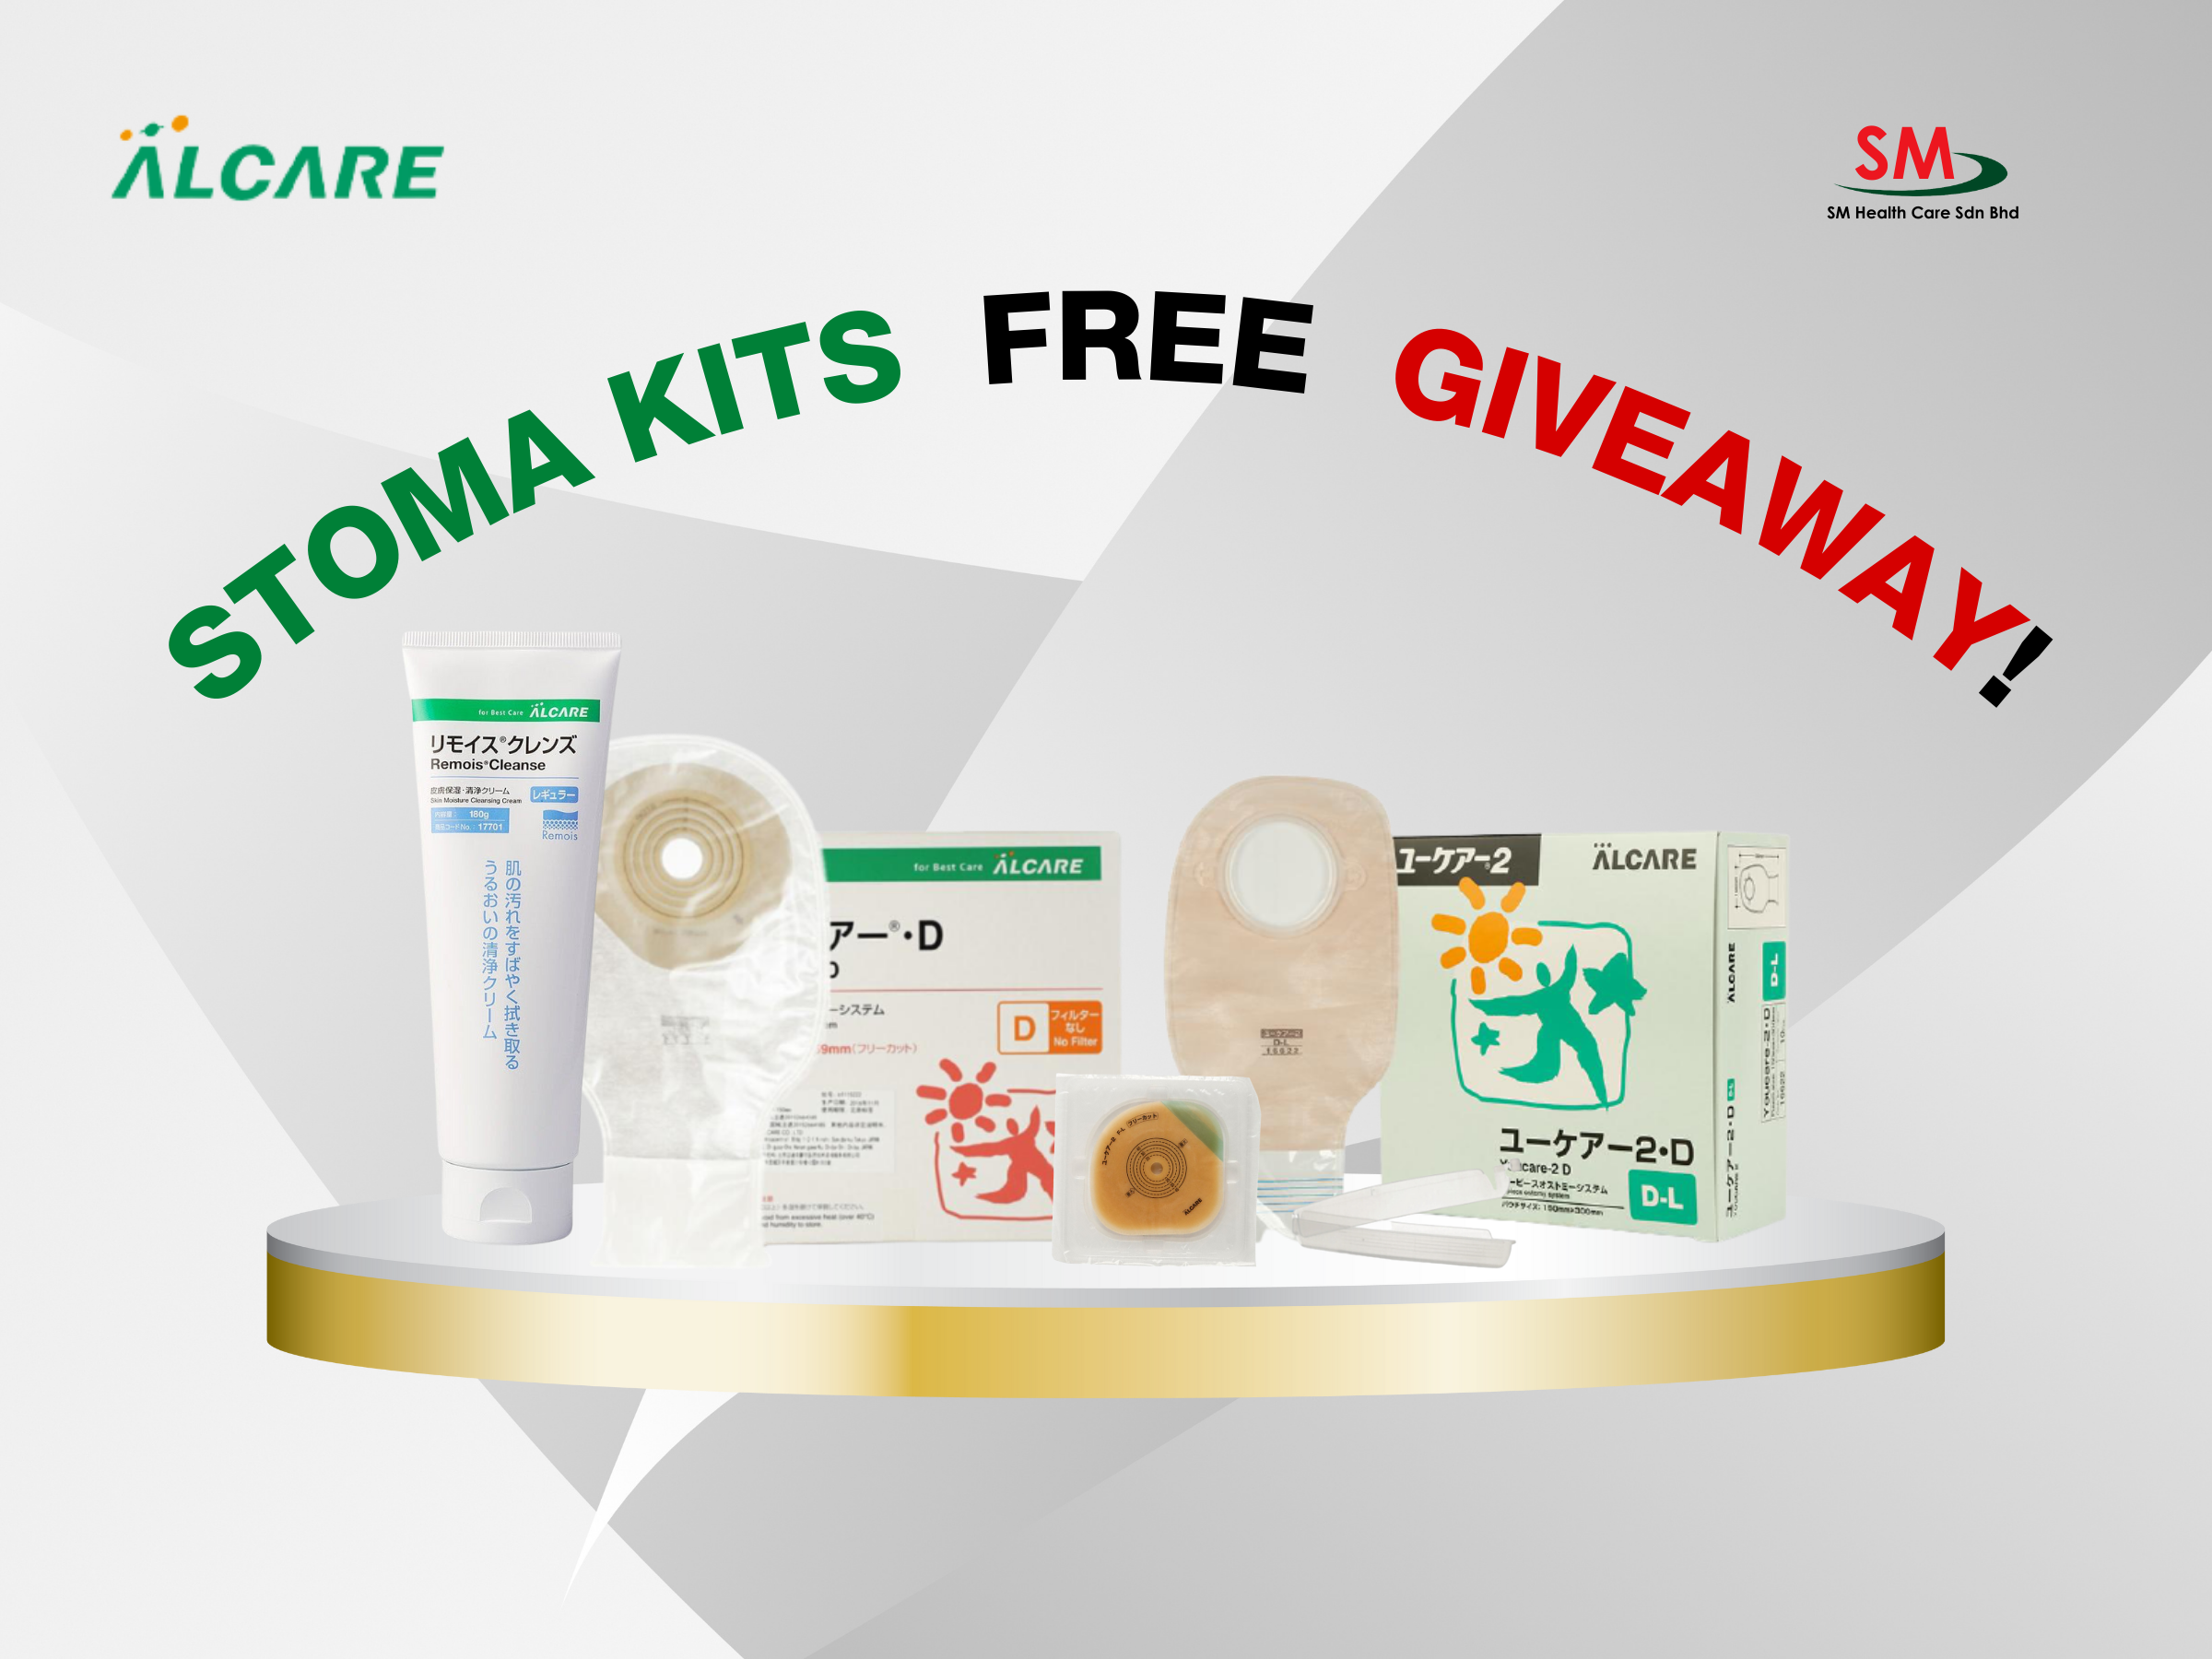 free stoma kits available at sm health care sdn bhd. stoma care items displayed.